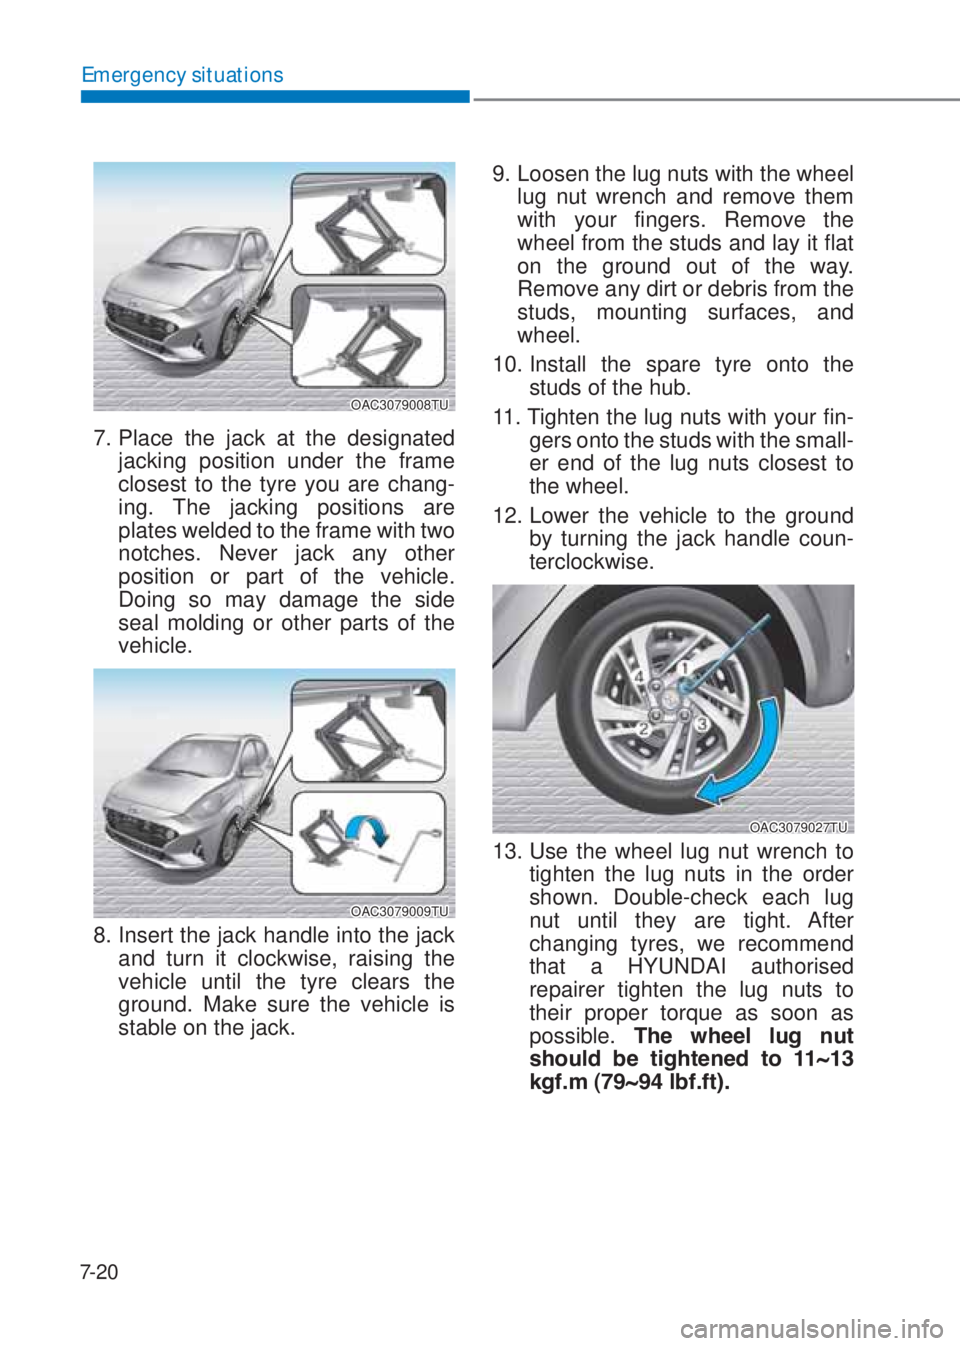 HYUNDAI I10 2019  Owners Manual 7-20
Emergency situations
OAC3079008TU
7. Place the jack at the designated 
jacking position under the frame 
closest to the tyre you are chang-
ing. The jacking positions are 
plates welded to the fr